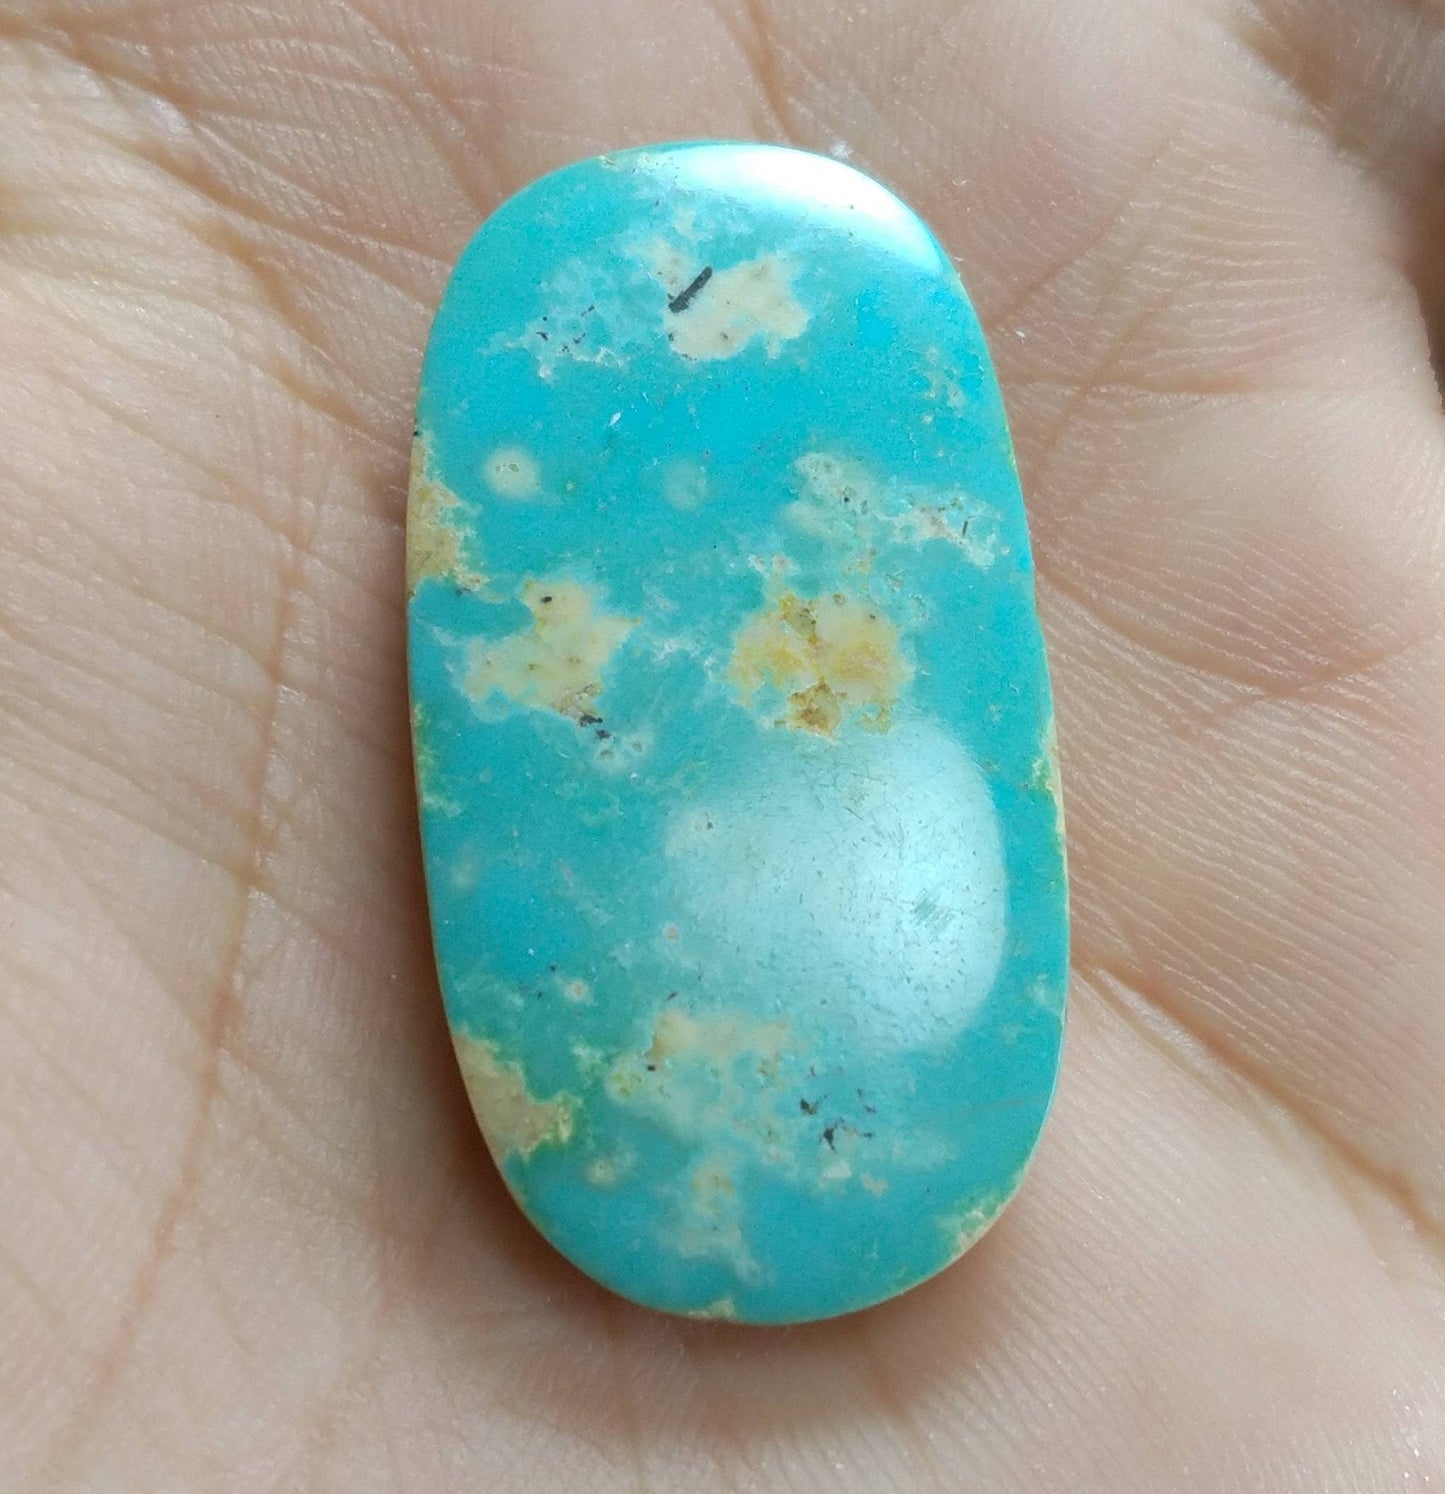 ARSAA GEMS AND MINERALSNatural top quality beautiful 52 carats untreated unheated oval shape turquoise cabochon - Premium  from ARSAA GEMS AND MINERALS - Just $50.00! Shop now at ARSAA GEMS AND MINERALS